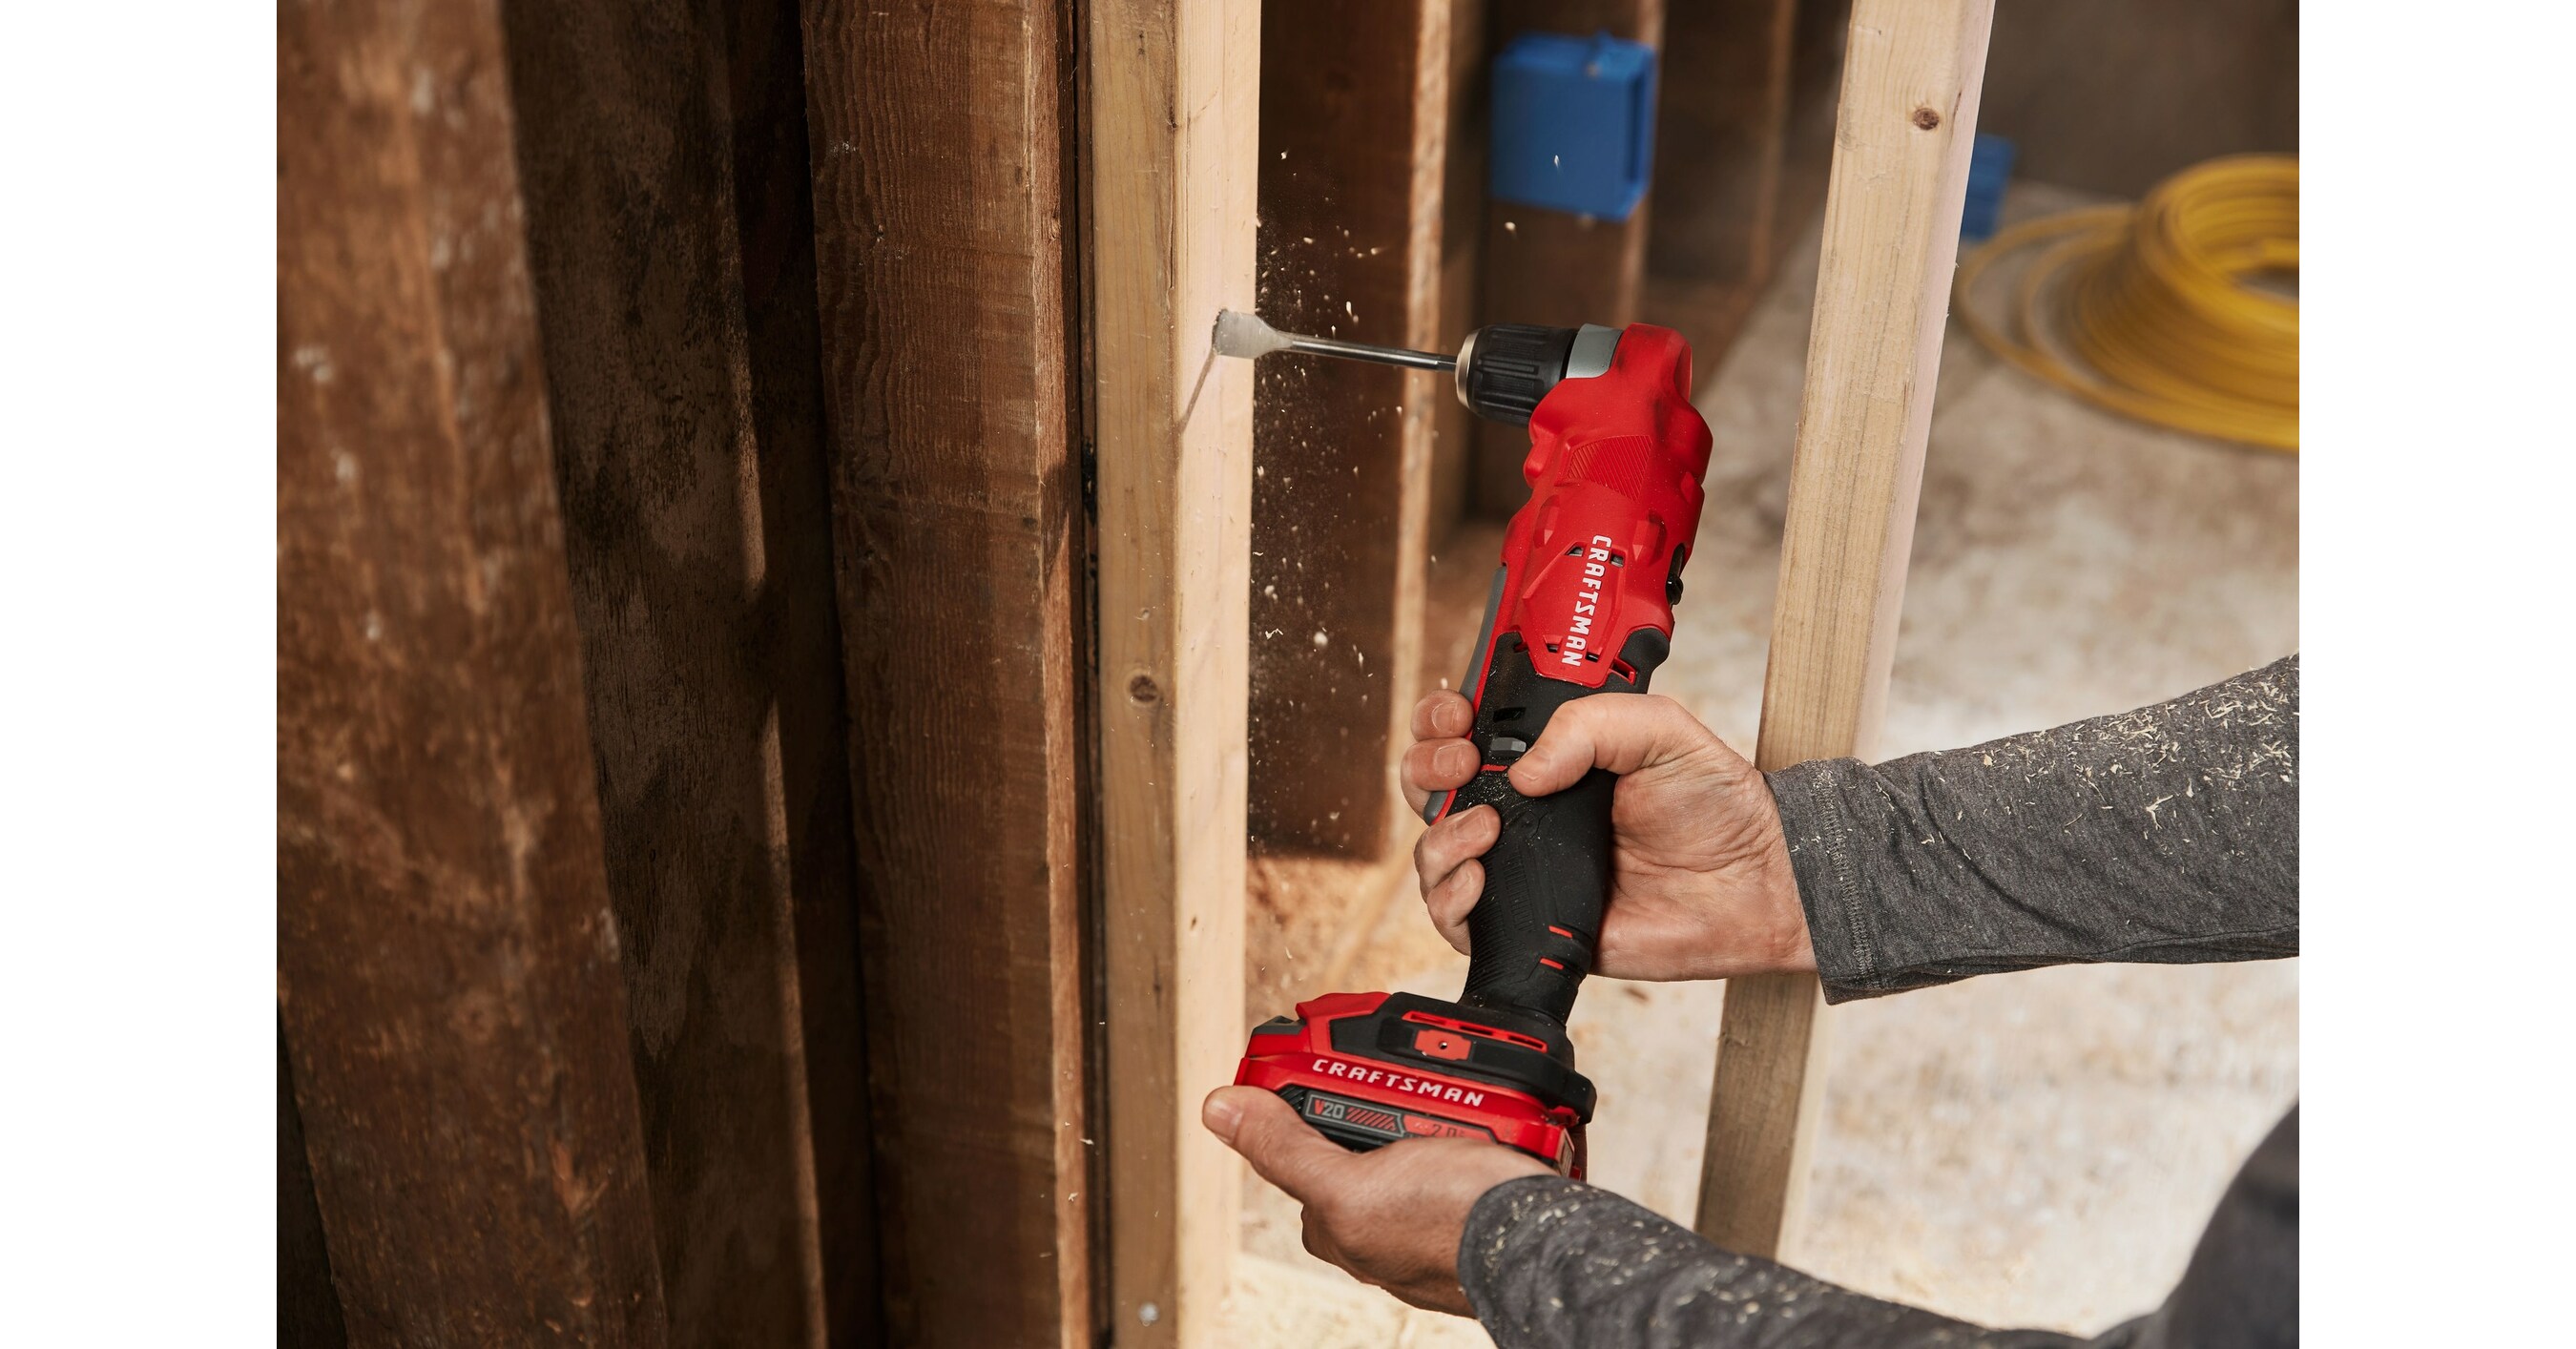 Black & Decker launches power tool line made from chemically